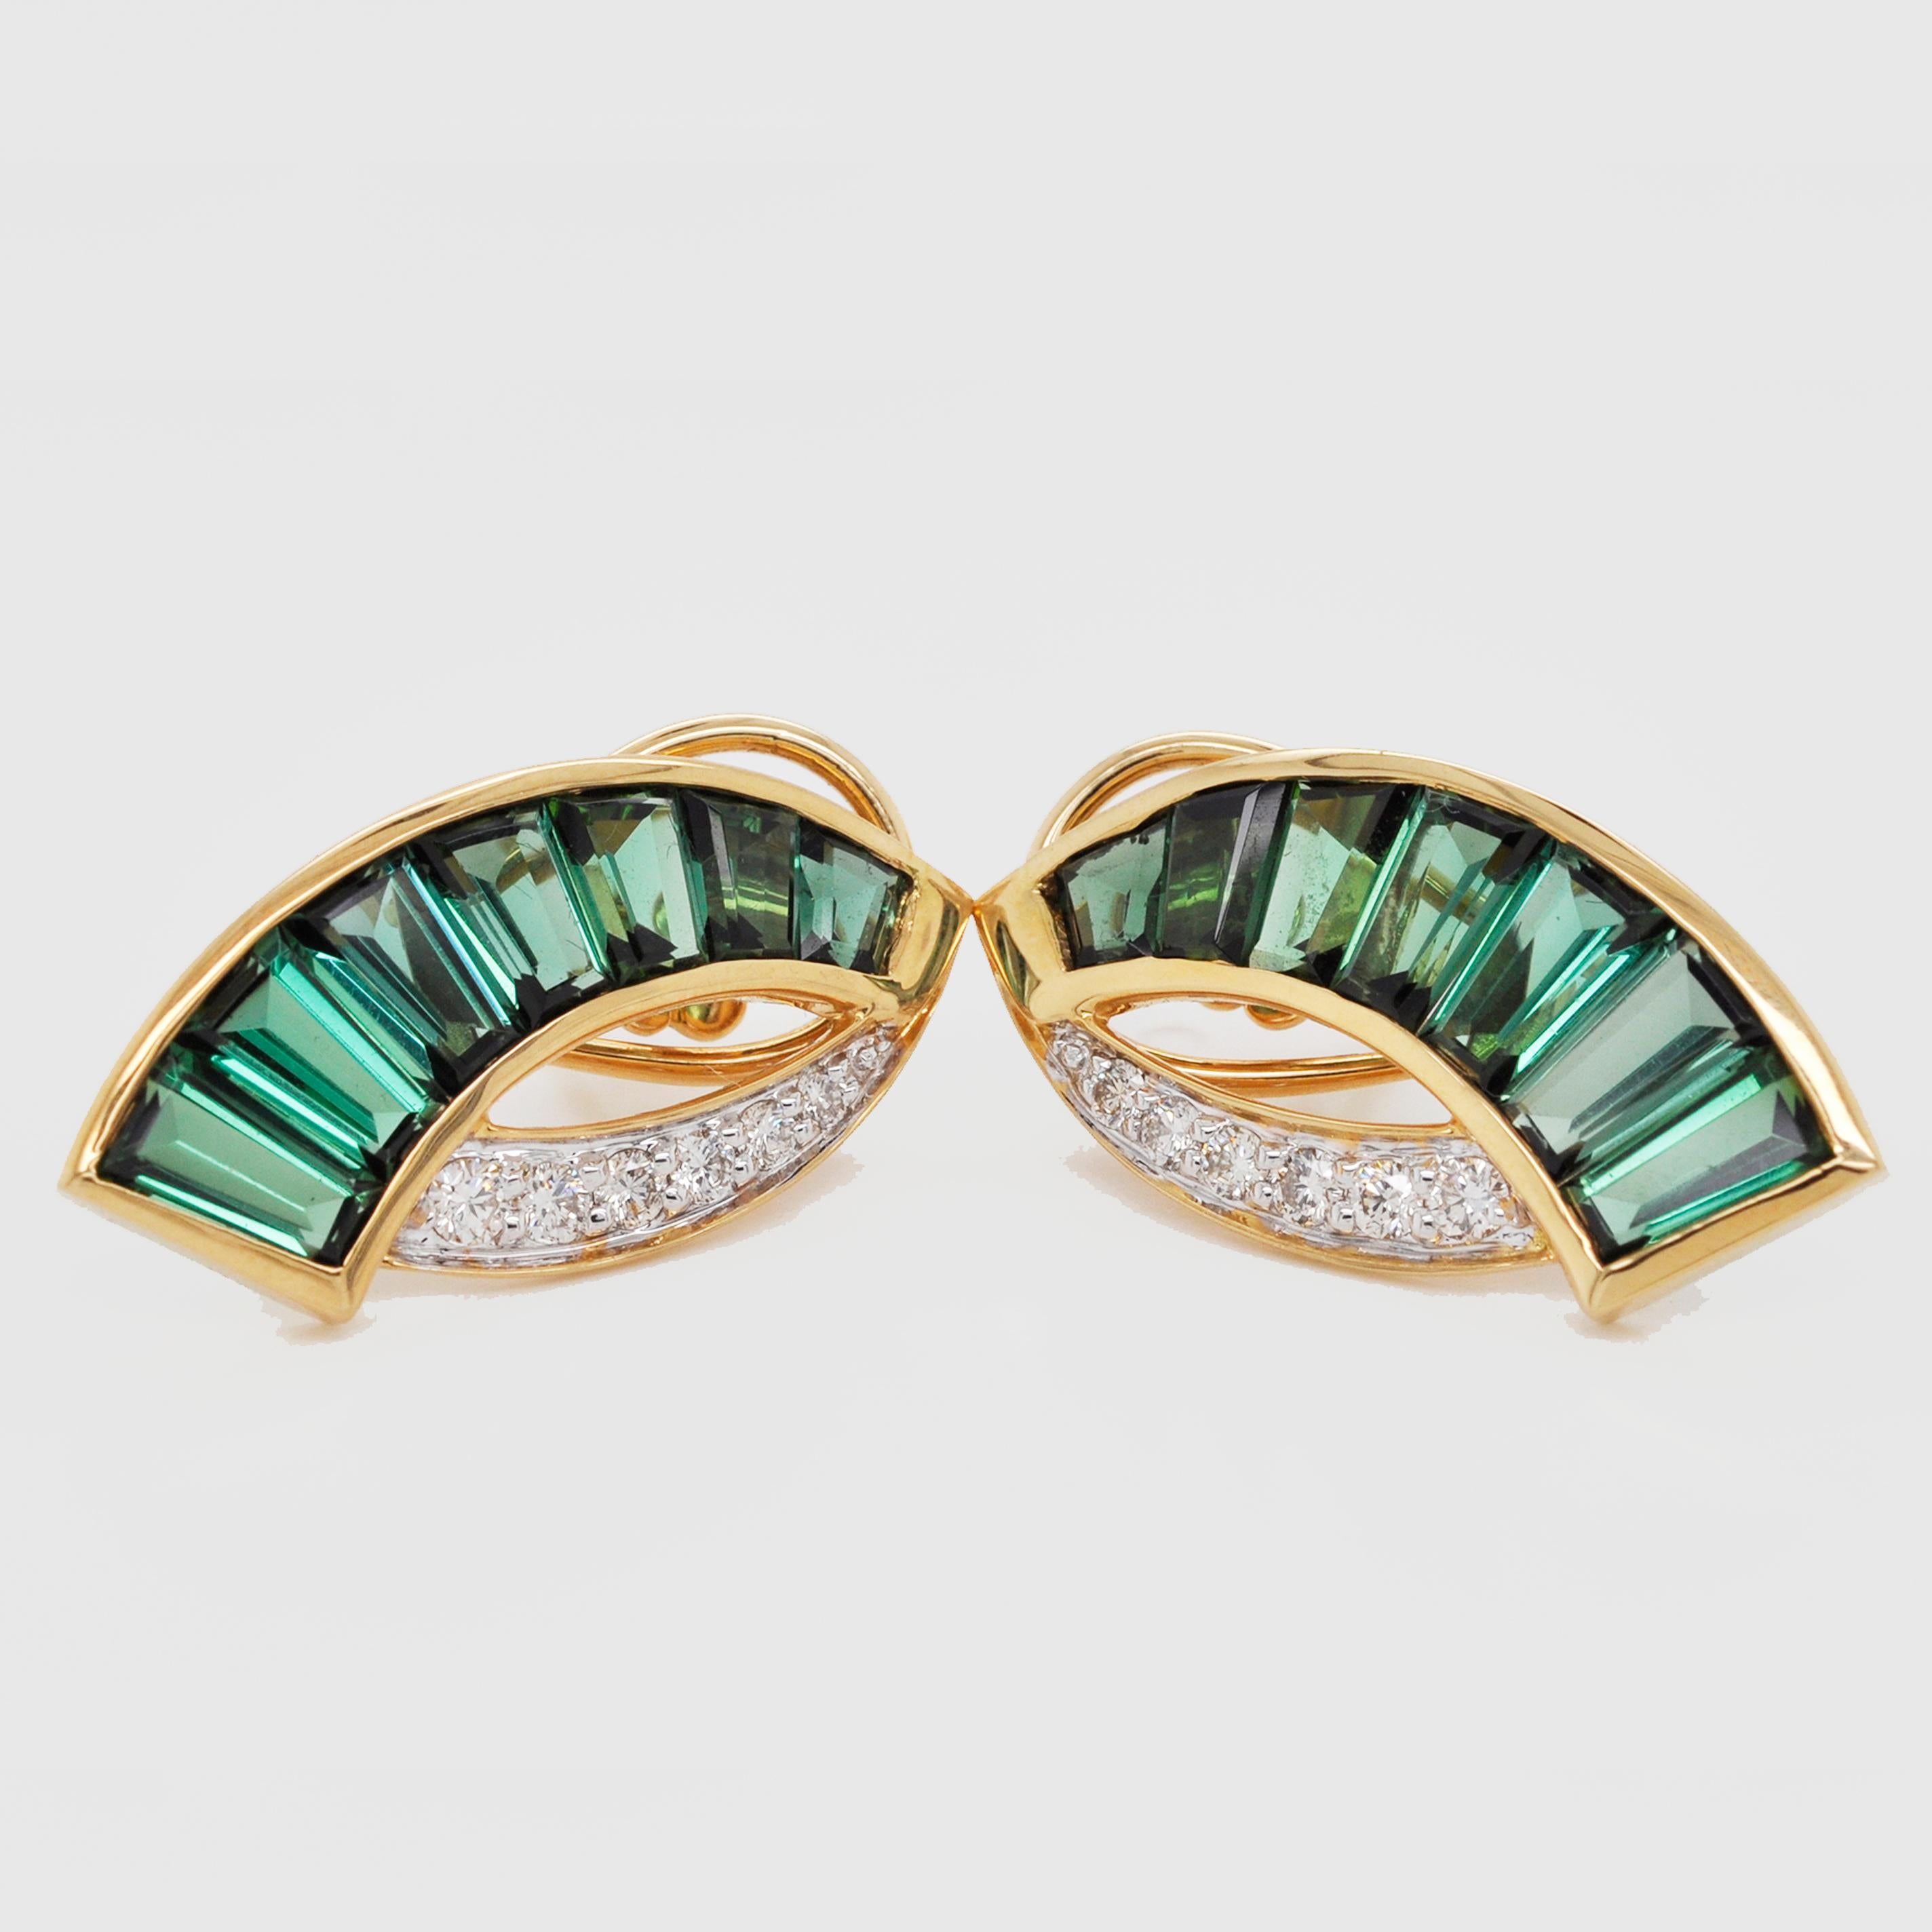 18 Karat Gold Caliber Cut Teal Green Tourmaline Baguette Diamond Stud Earrings In New Condition For Sale In Jaipur, Rajasthan